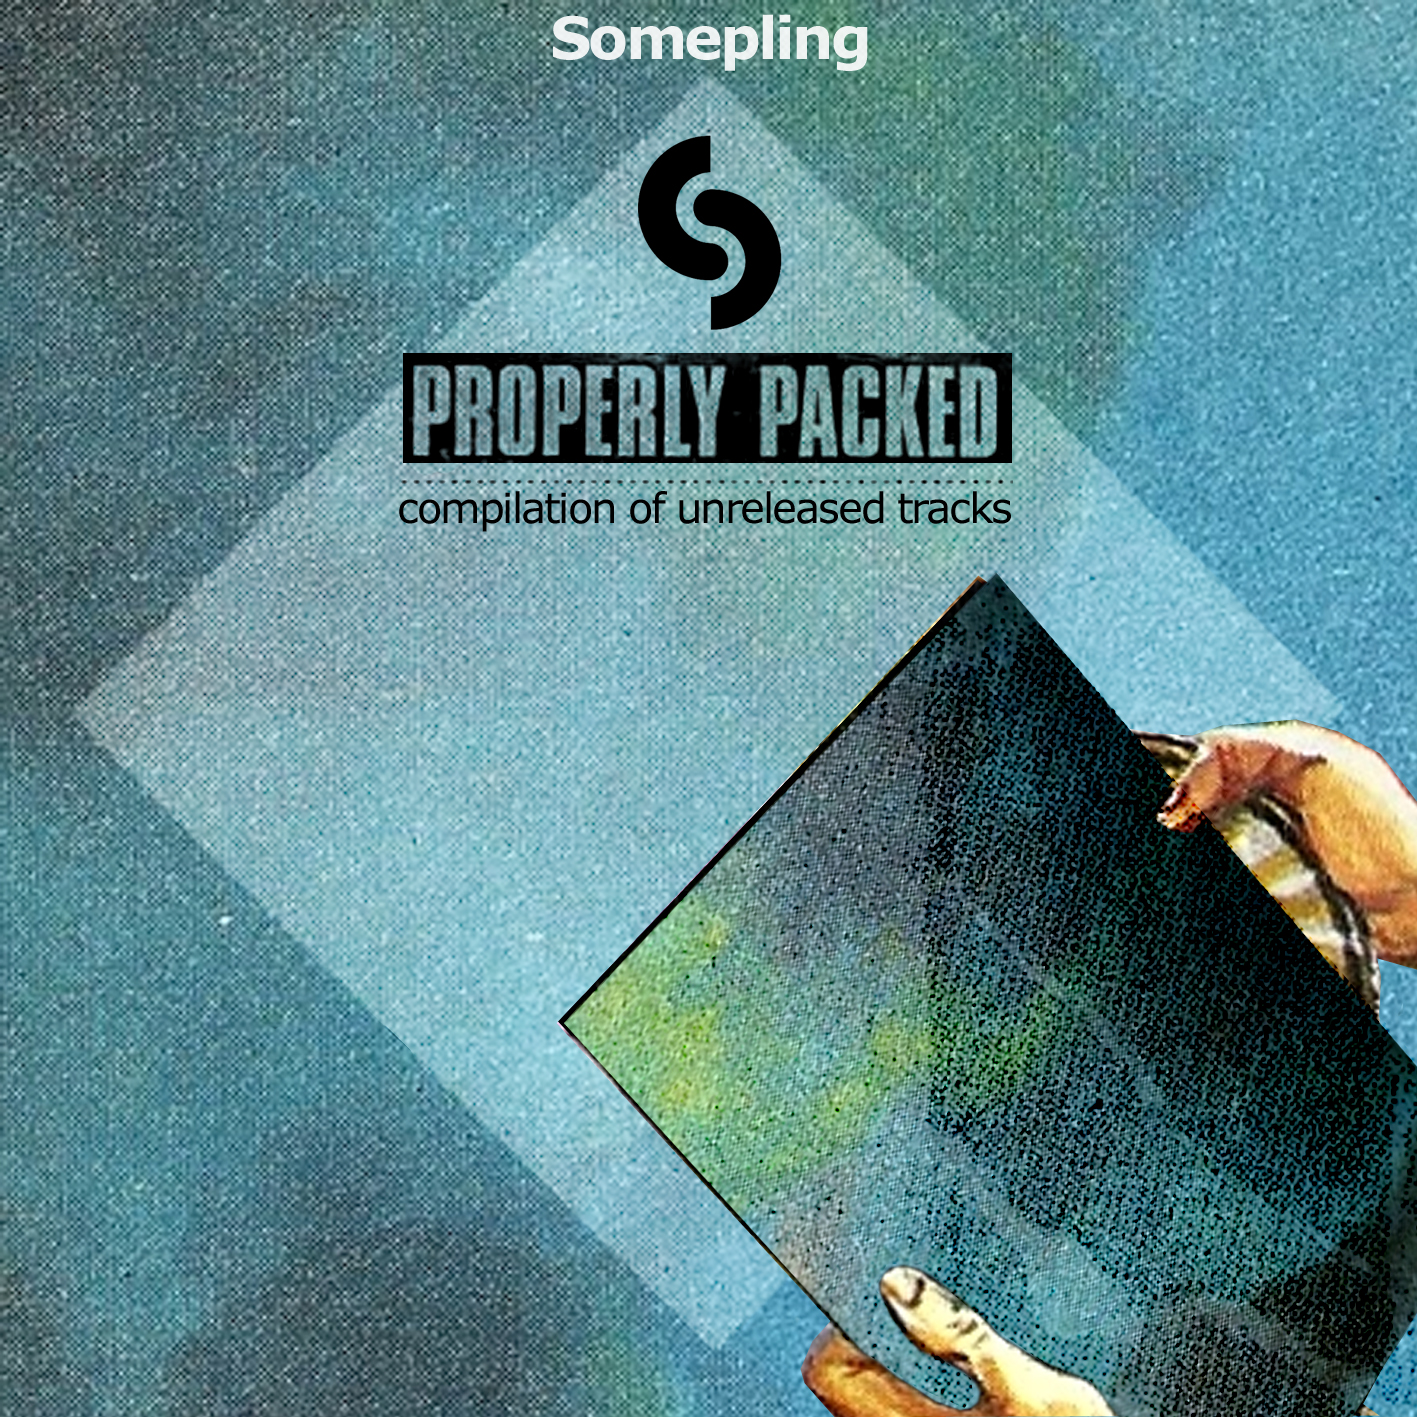 Free Download: Somepling – Properly Packed (2012)